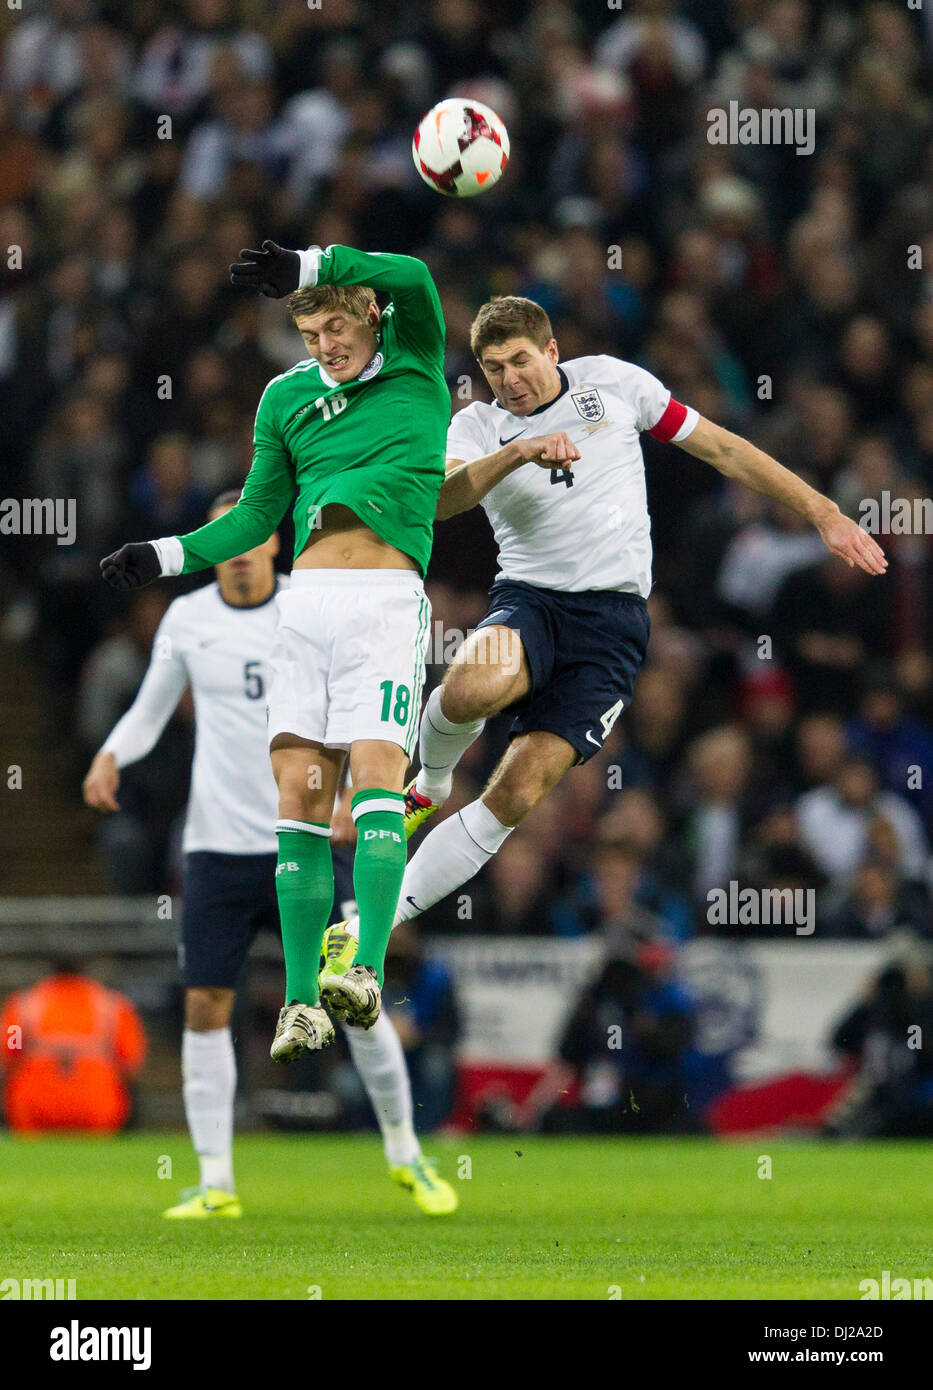 London, UK. 19th Nov, 2013. England's Steven GERRARD in a challenge with Germany's Toni KROOS during the International football friendly game between England and Germany from Wembley Stadium. Credit:  Action Plus Sports/Alamy Live News Stock Photo